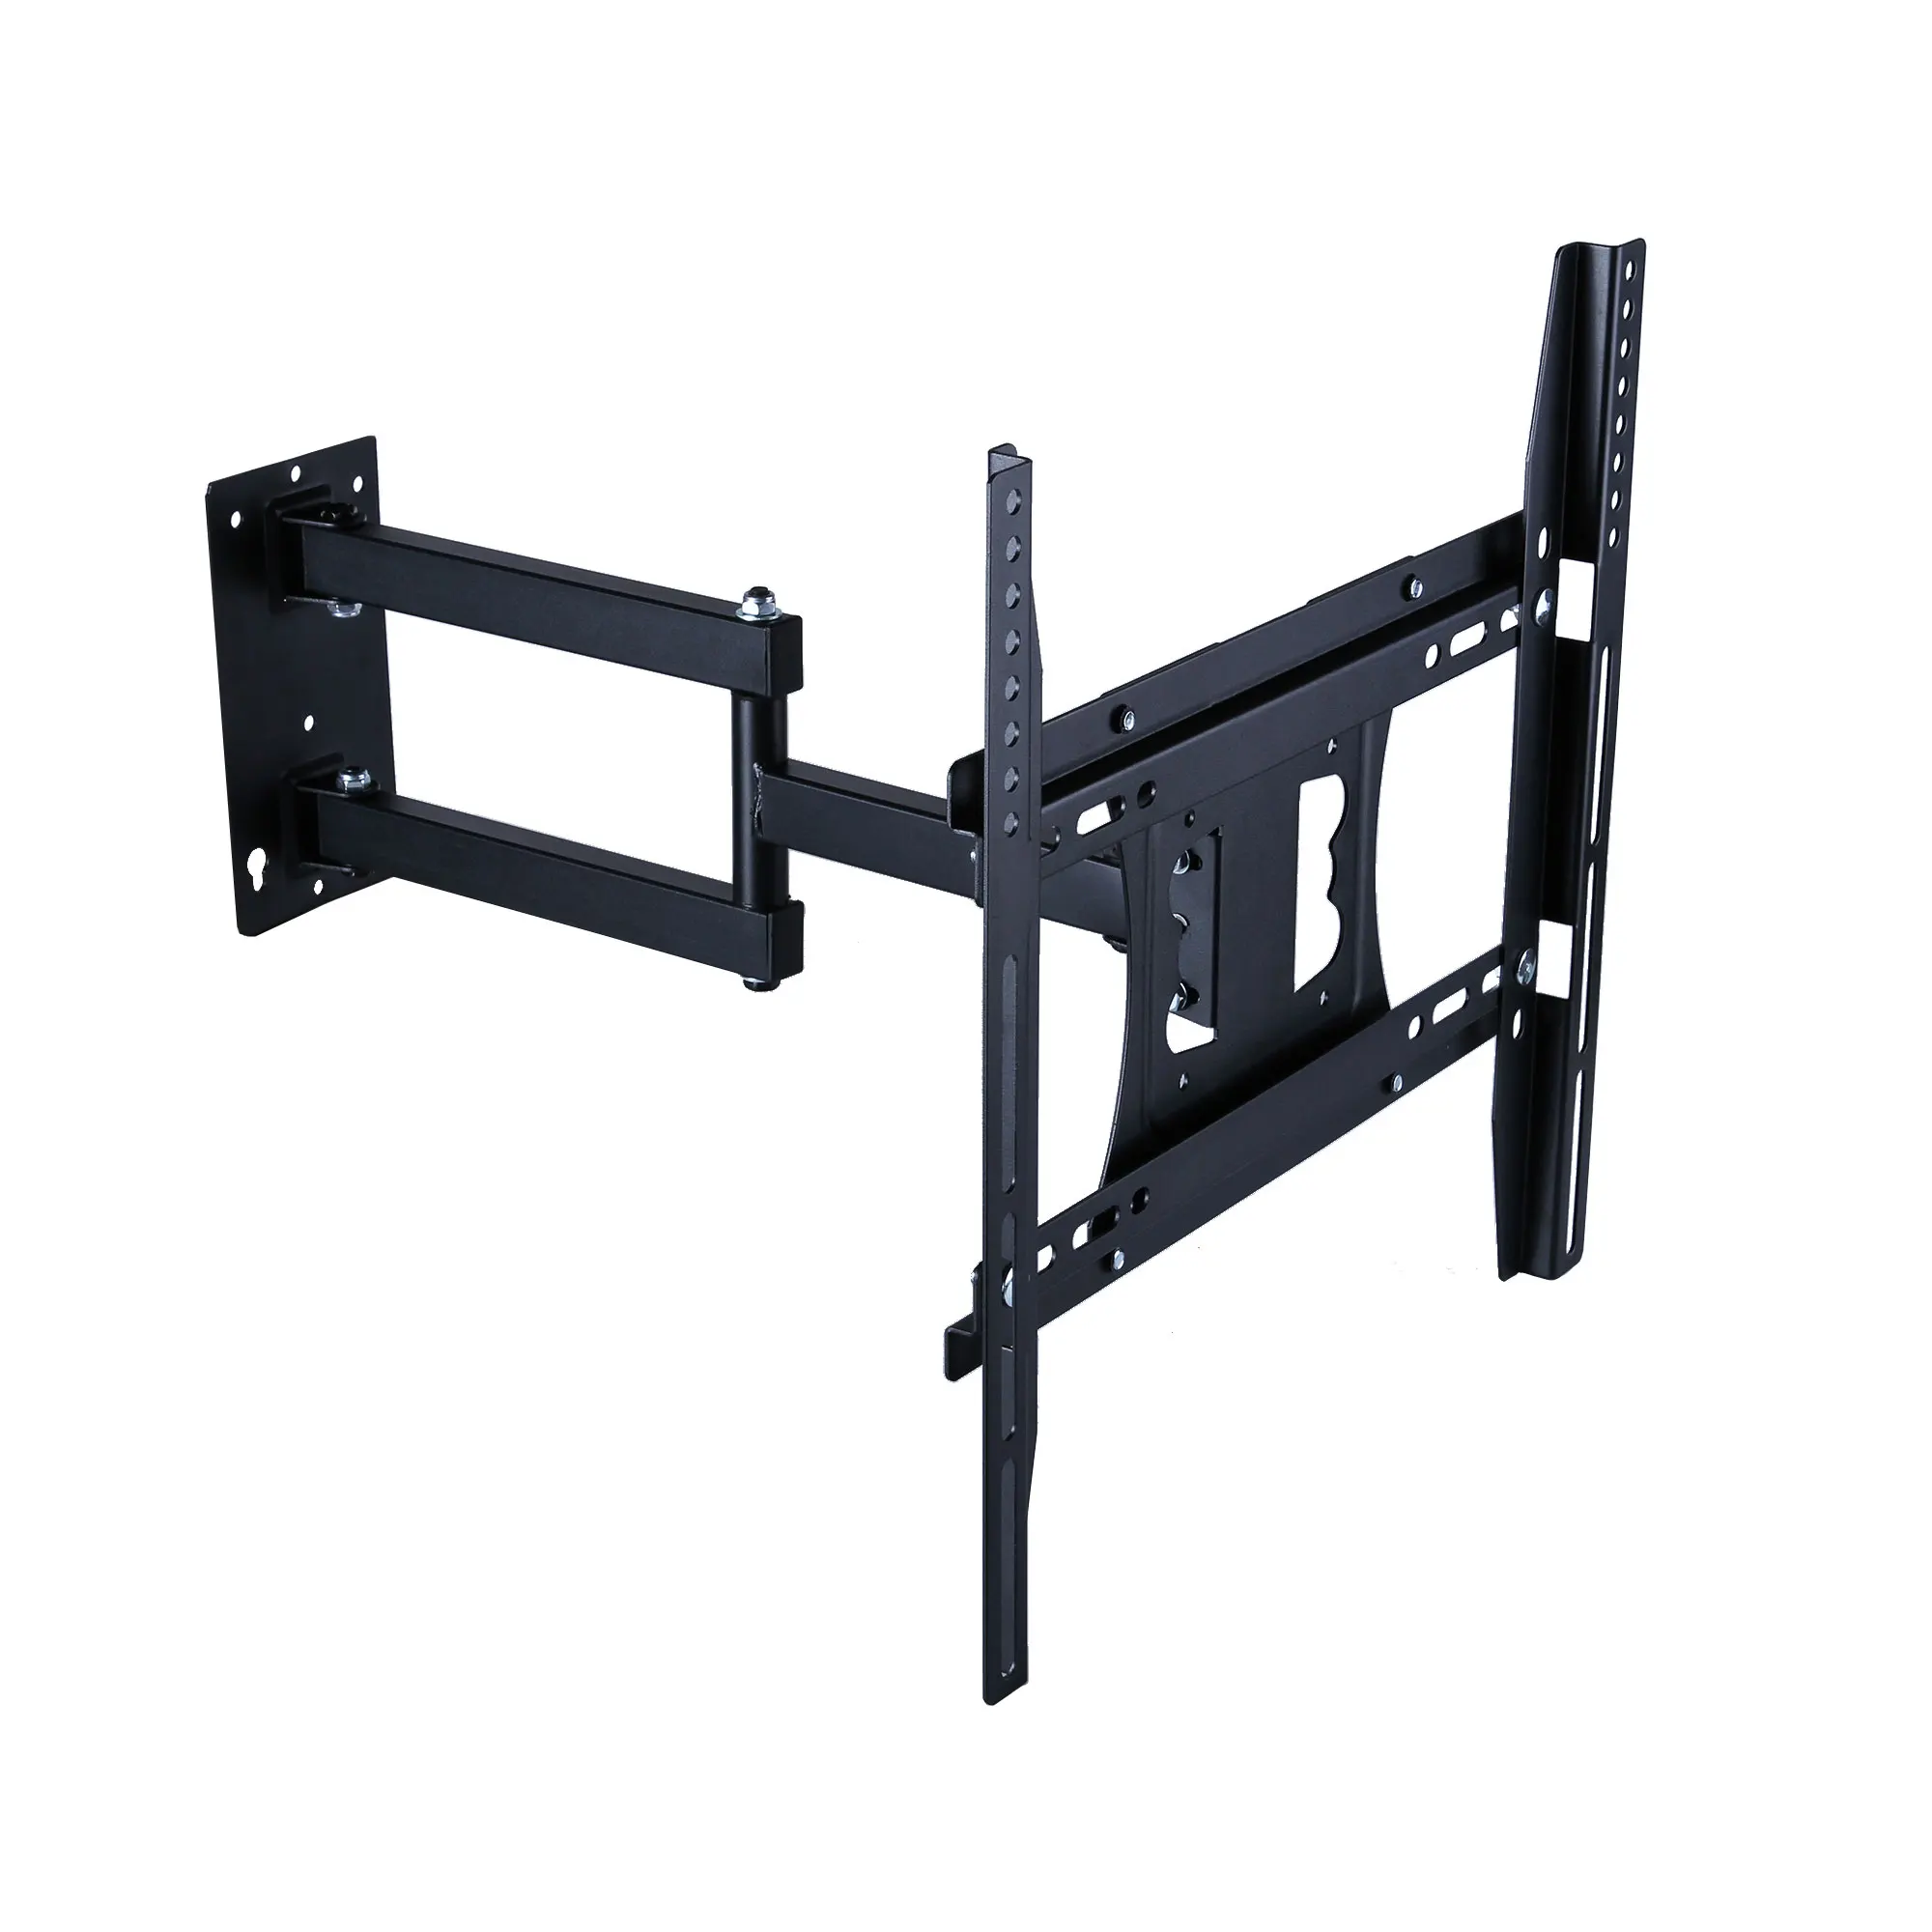 Tv Muurbeugel 26-55 Inches Full Motion Tv Beugel Voor Tcl Voor Sony Flat Screen Buy Lcd Tv Mount,26-55 Inches Muurbeugel,Tv Mount Product on Alibaba.com